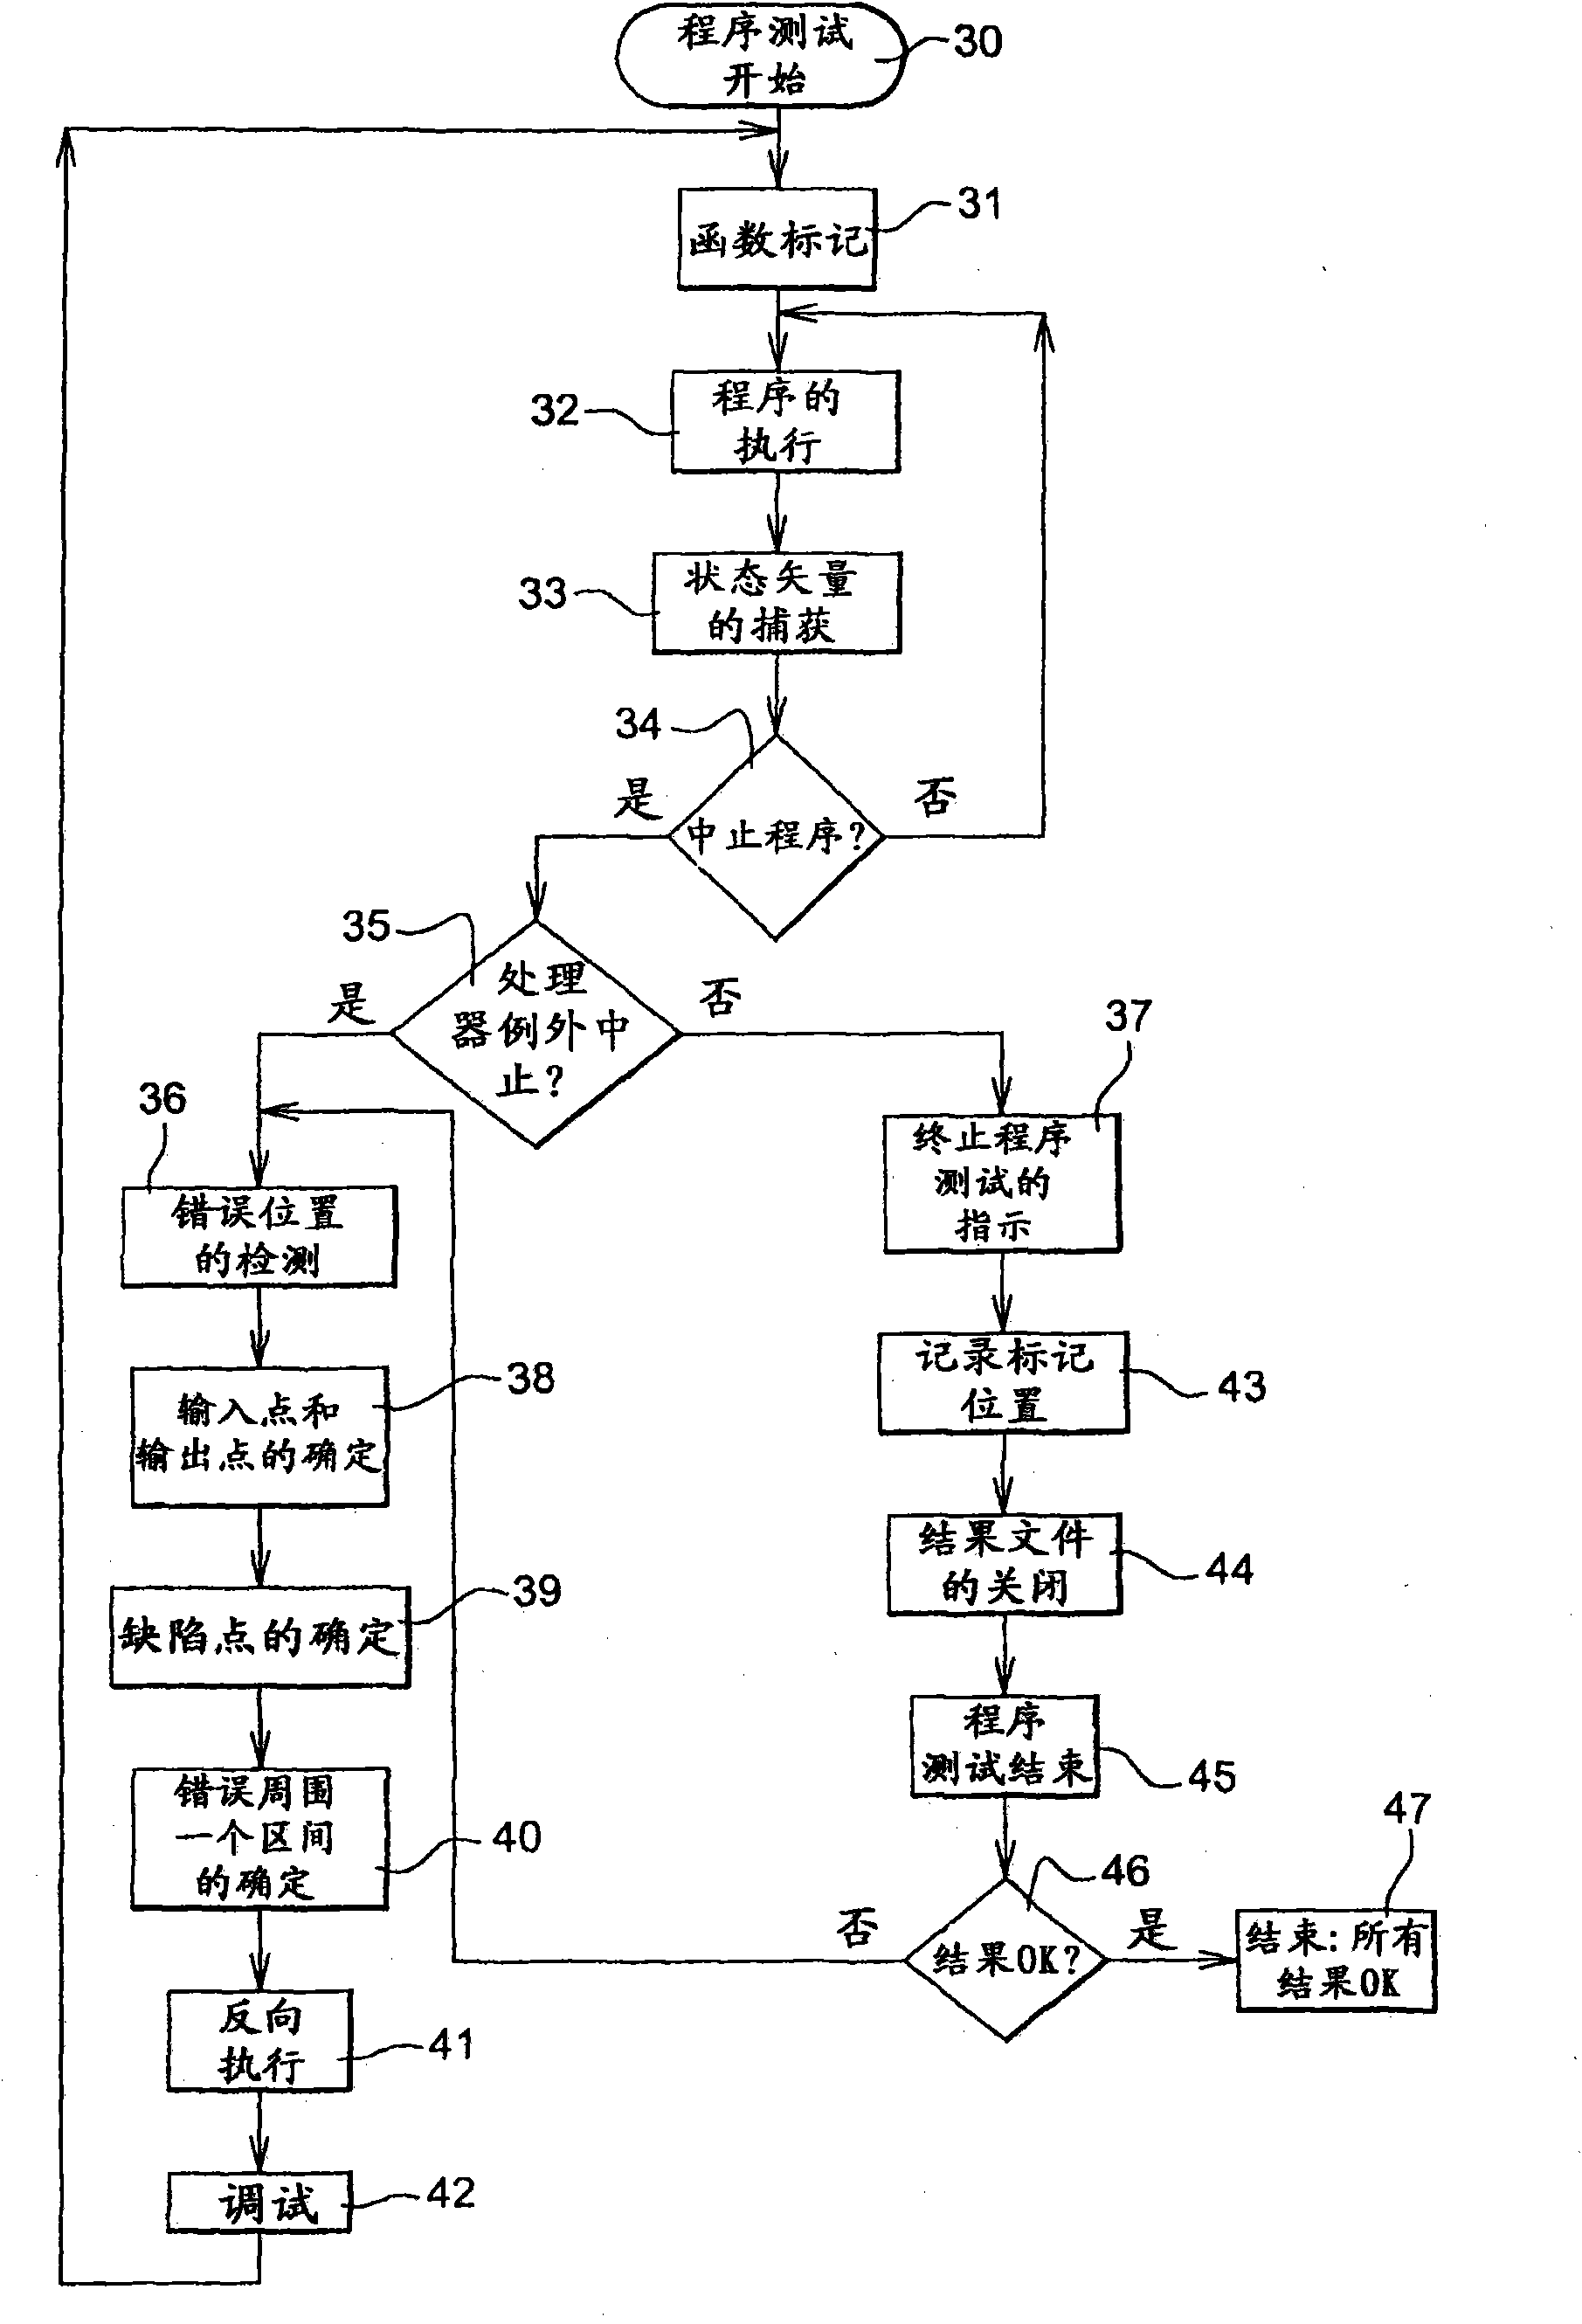 Method for debugging operational software of a system onboard an aircraft and device for implementing the same